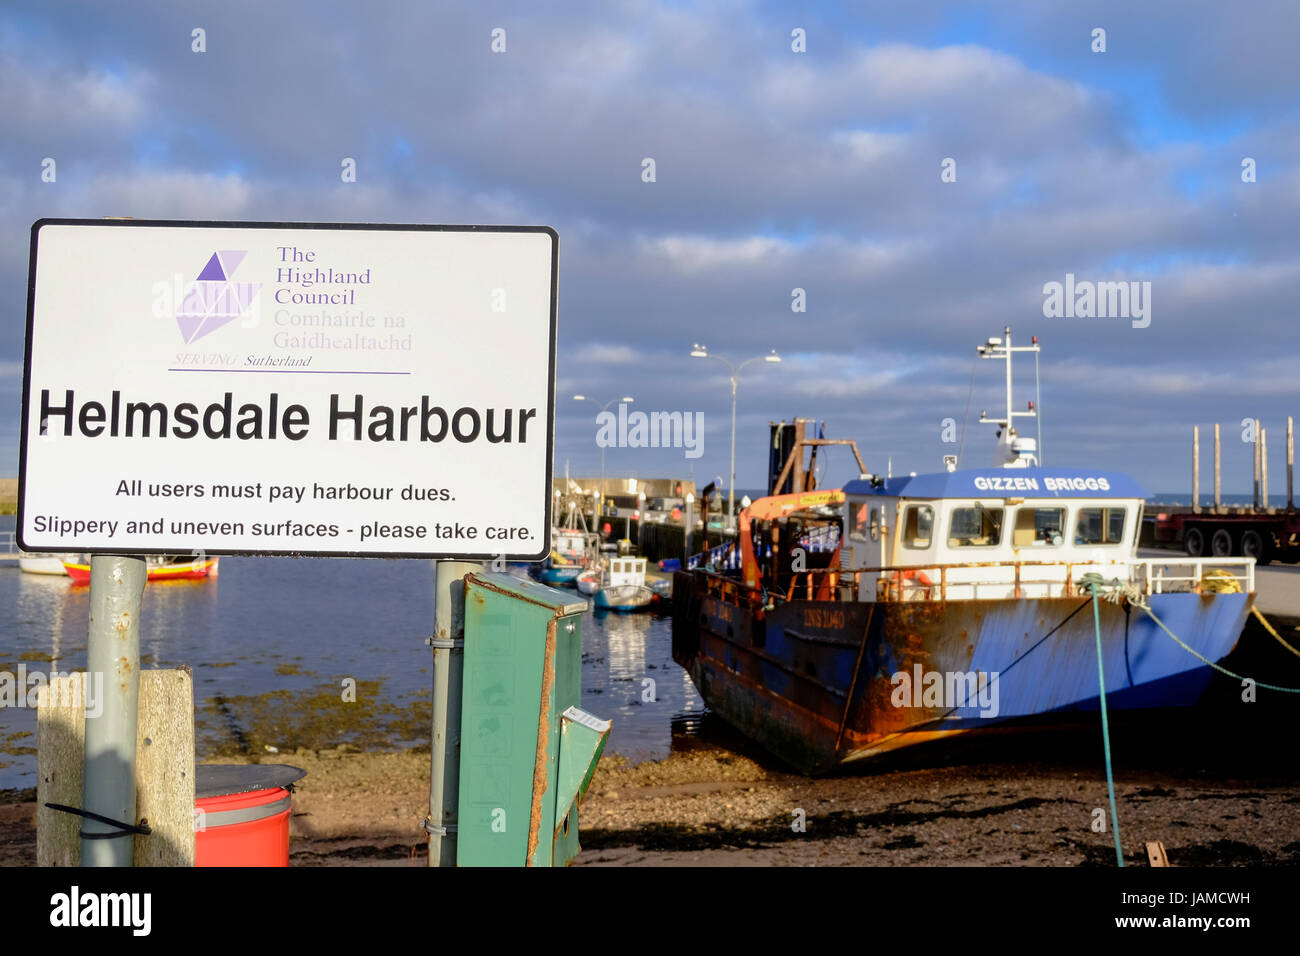 Helmsdale Harbour, Caithness, Scotland. Stock Photo